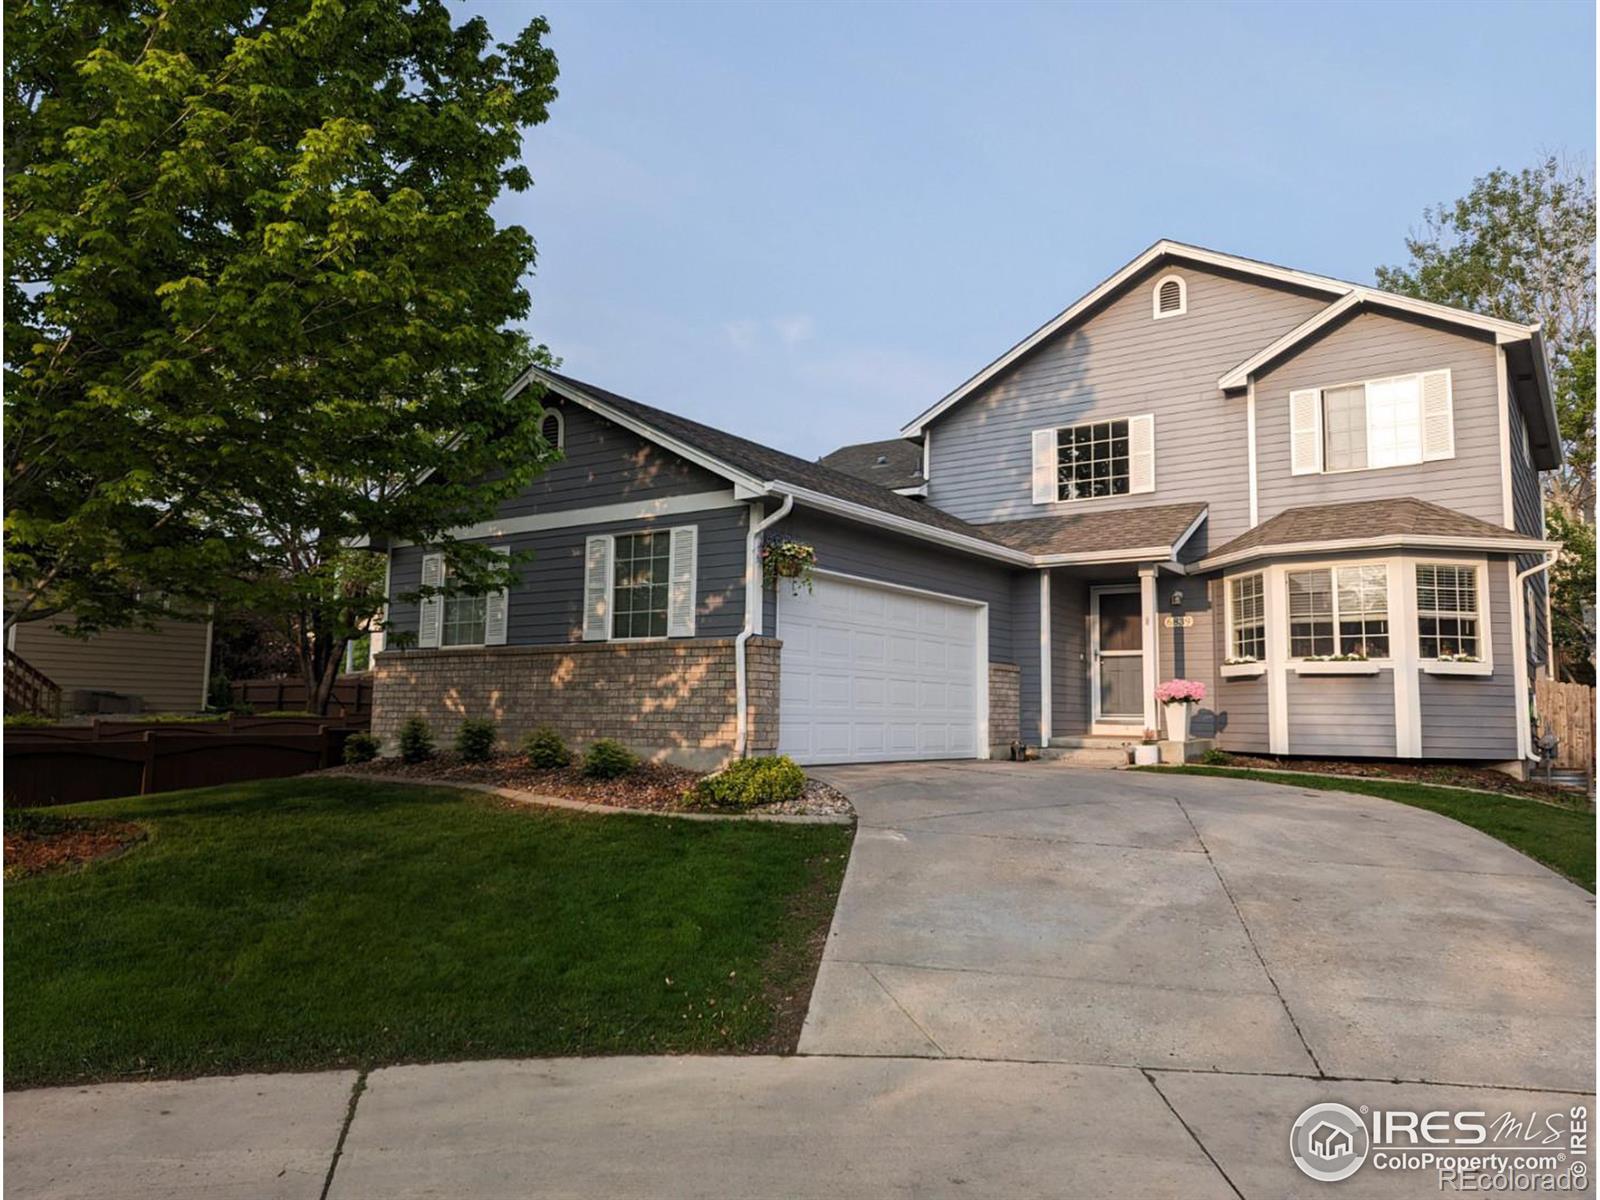 6839  Avondale Road, fort collins MLS: 123456789988303 Beds: 4 Baths: 4 Price: $629,950